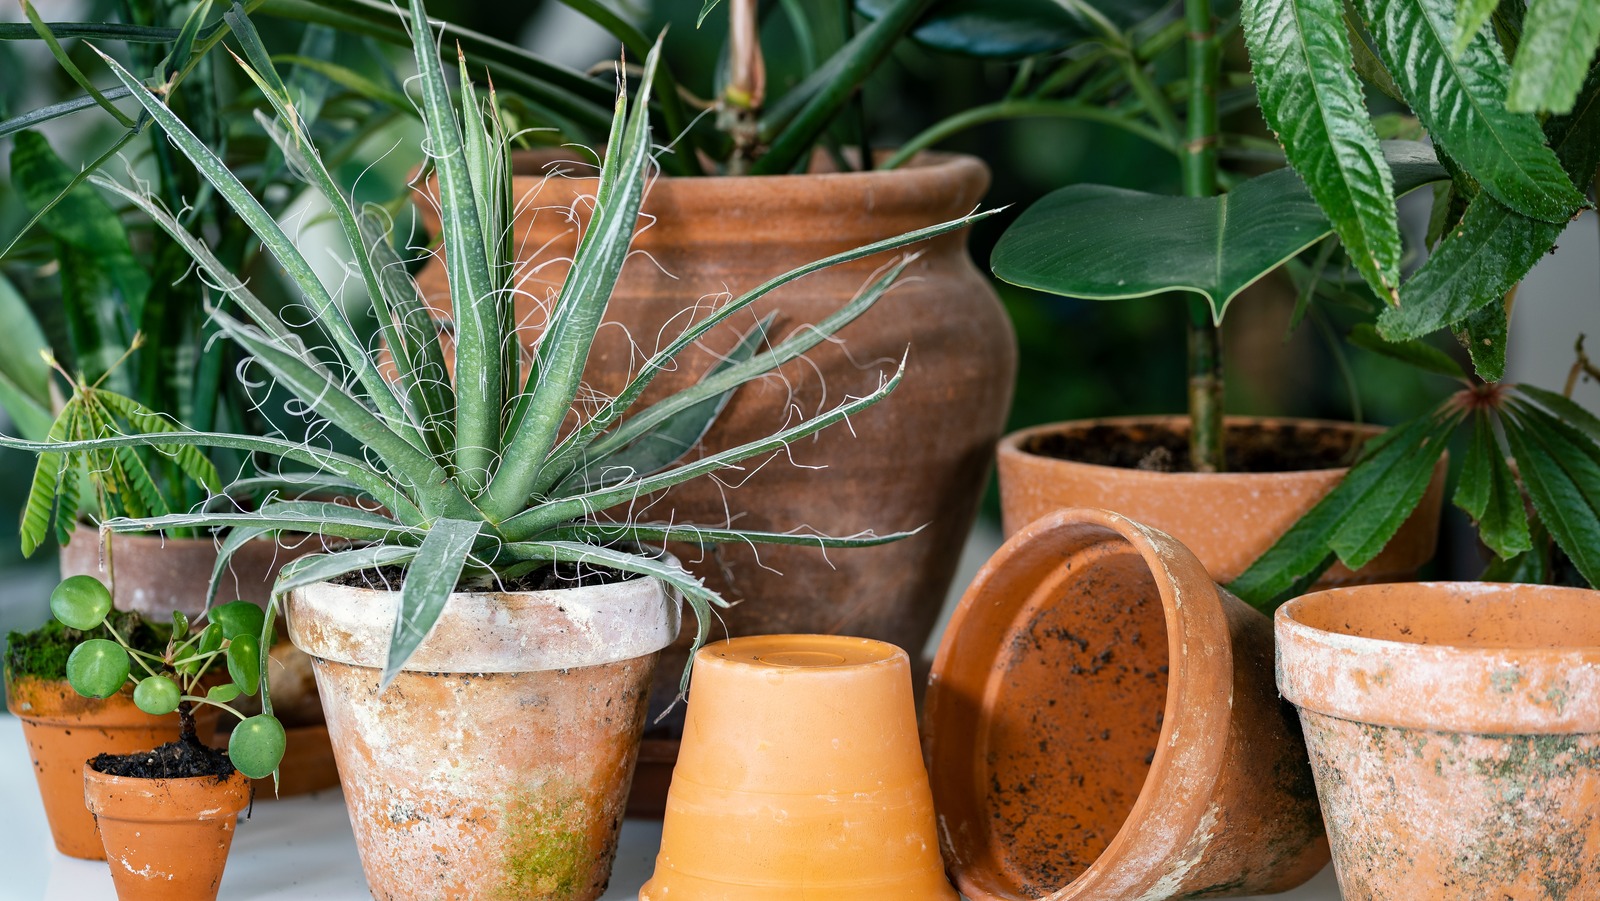 https://www.housedigest.com/img/gallery/5-tips-for-gardening-with-terracotta-pots/l-intro-1668247820.jpg